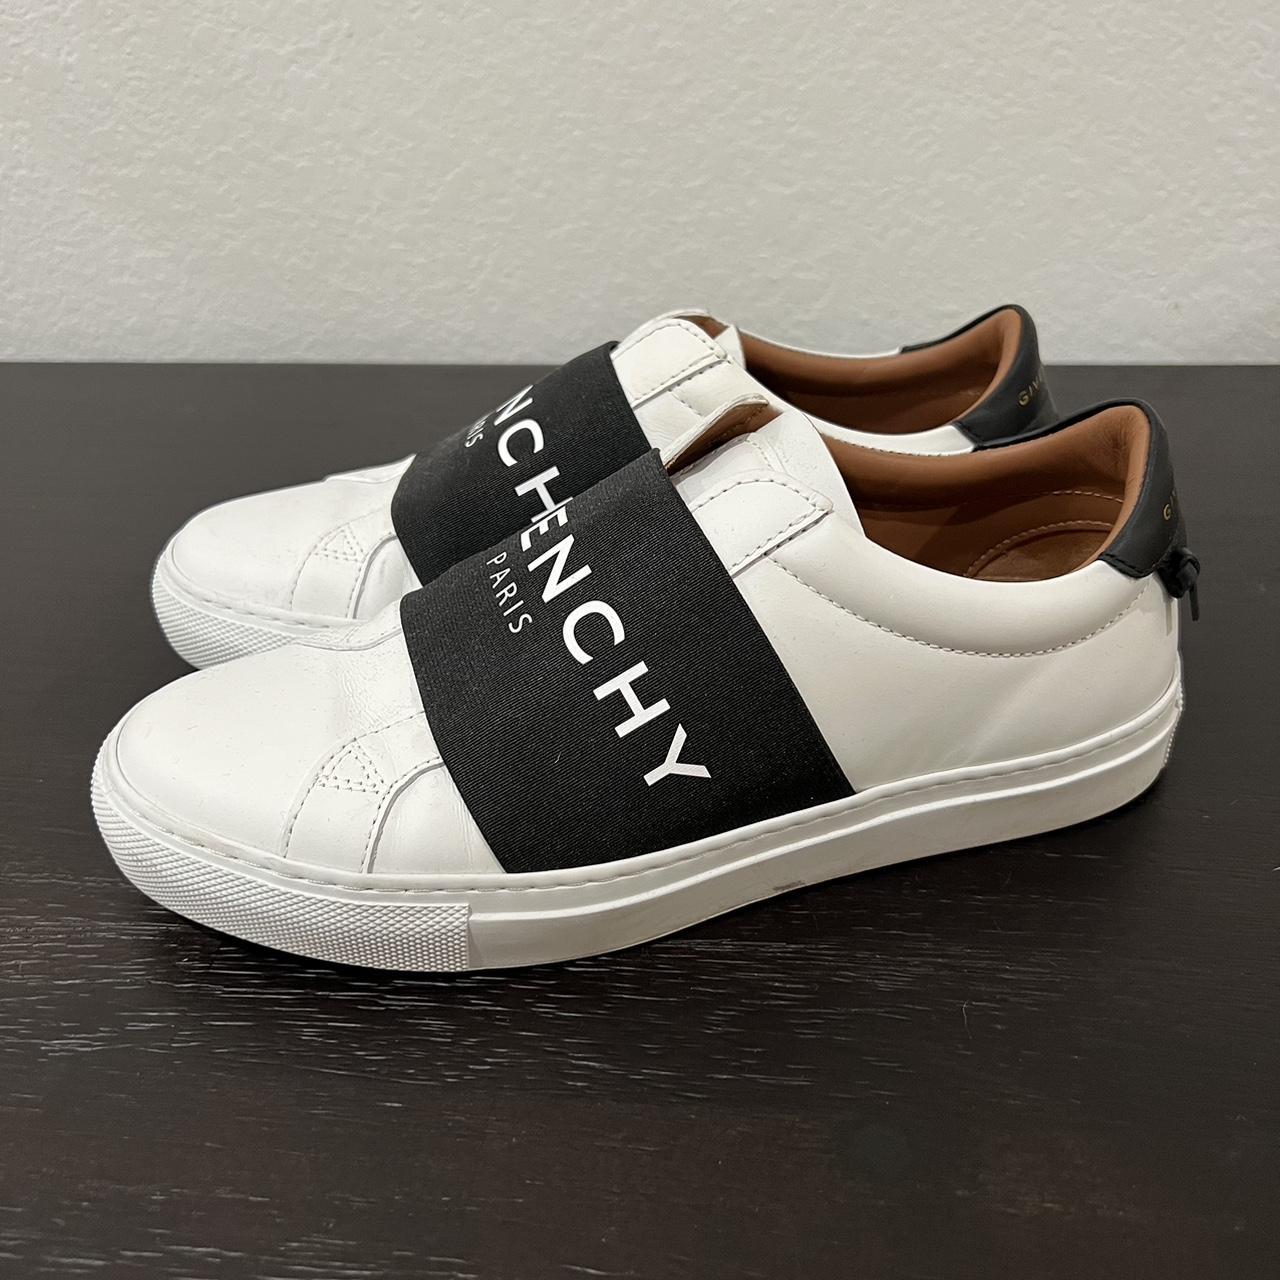 Givenchy Women's White and Black Trainers | Depop